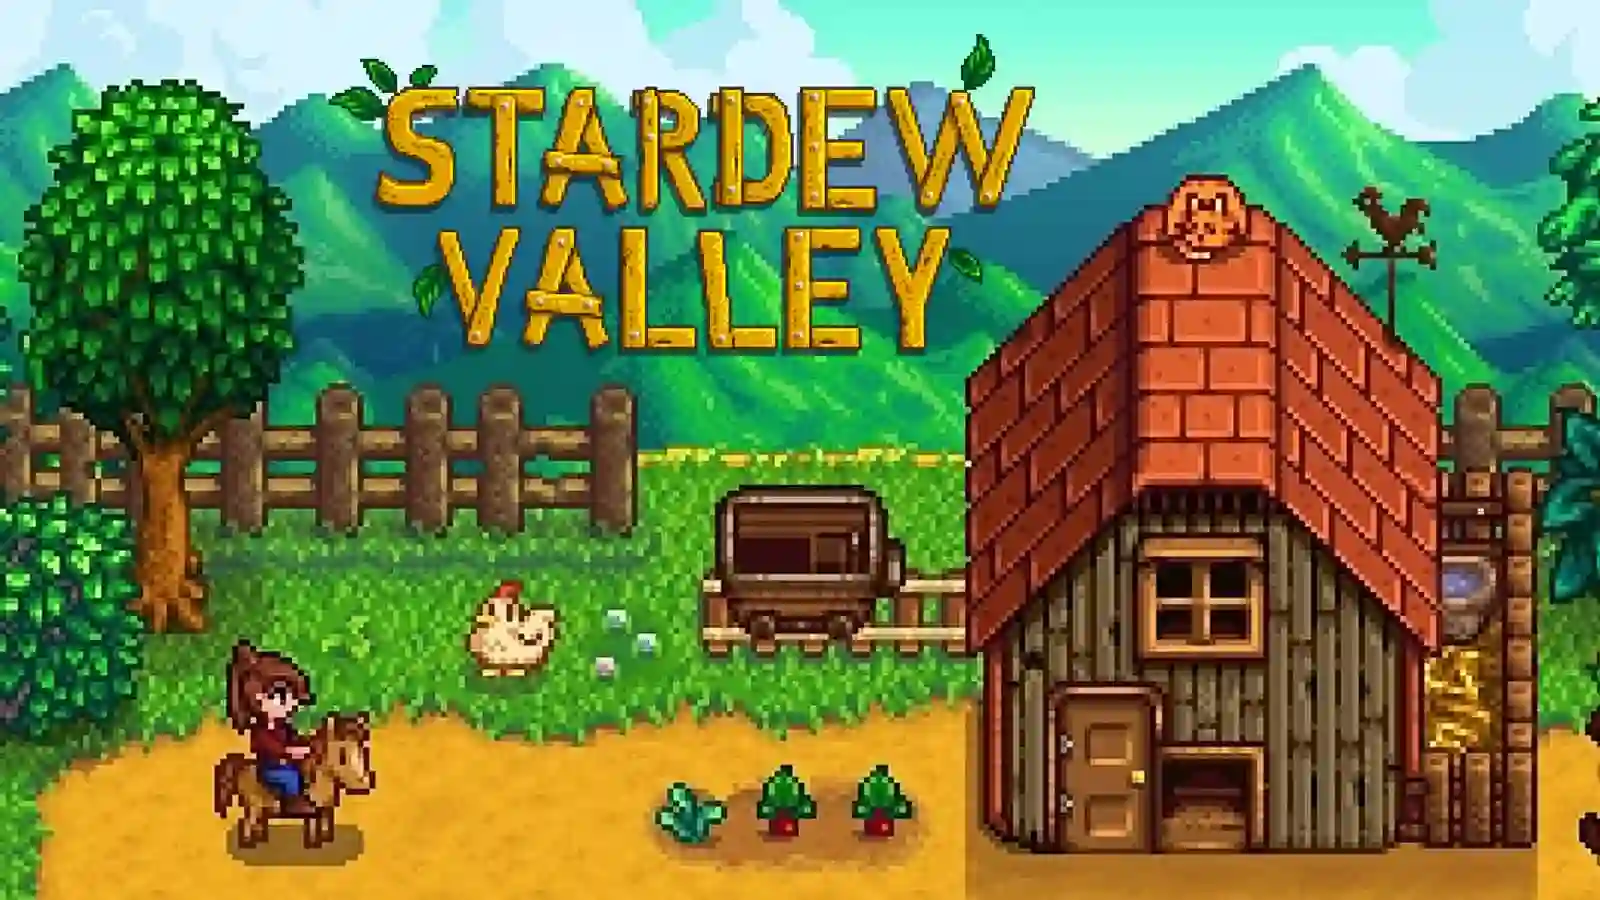 Can you buy a wedding ring Stardew Valley